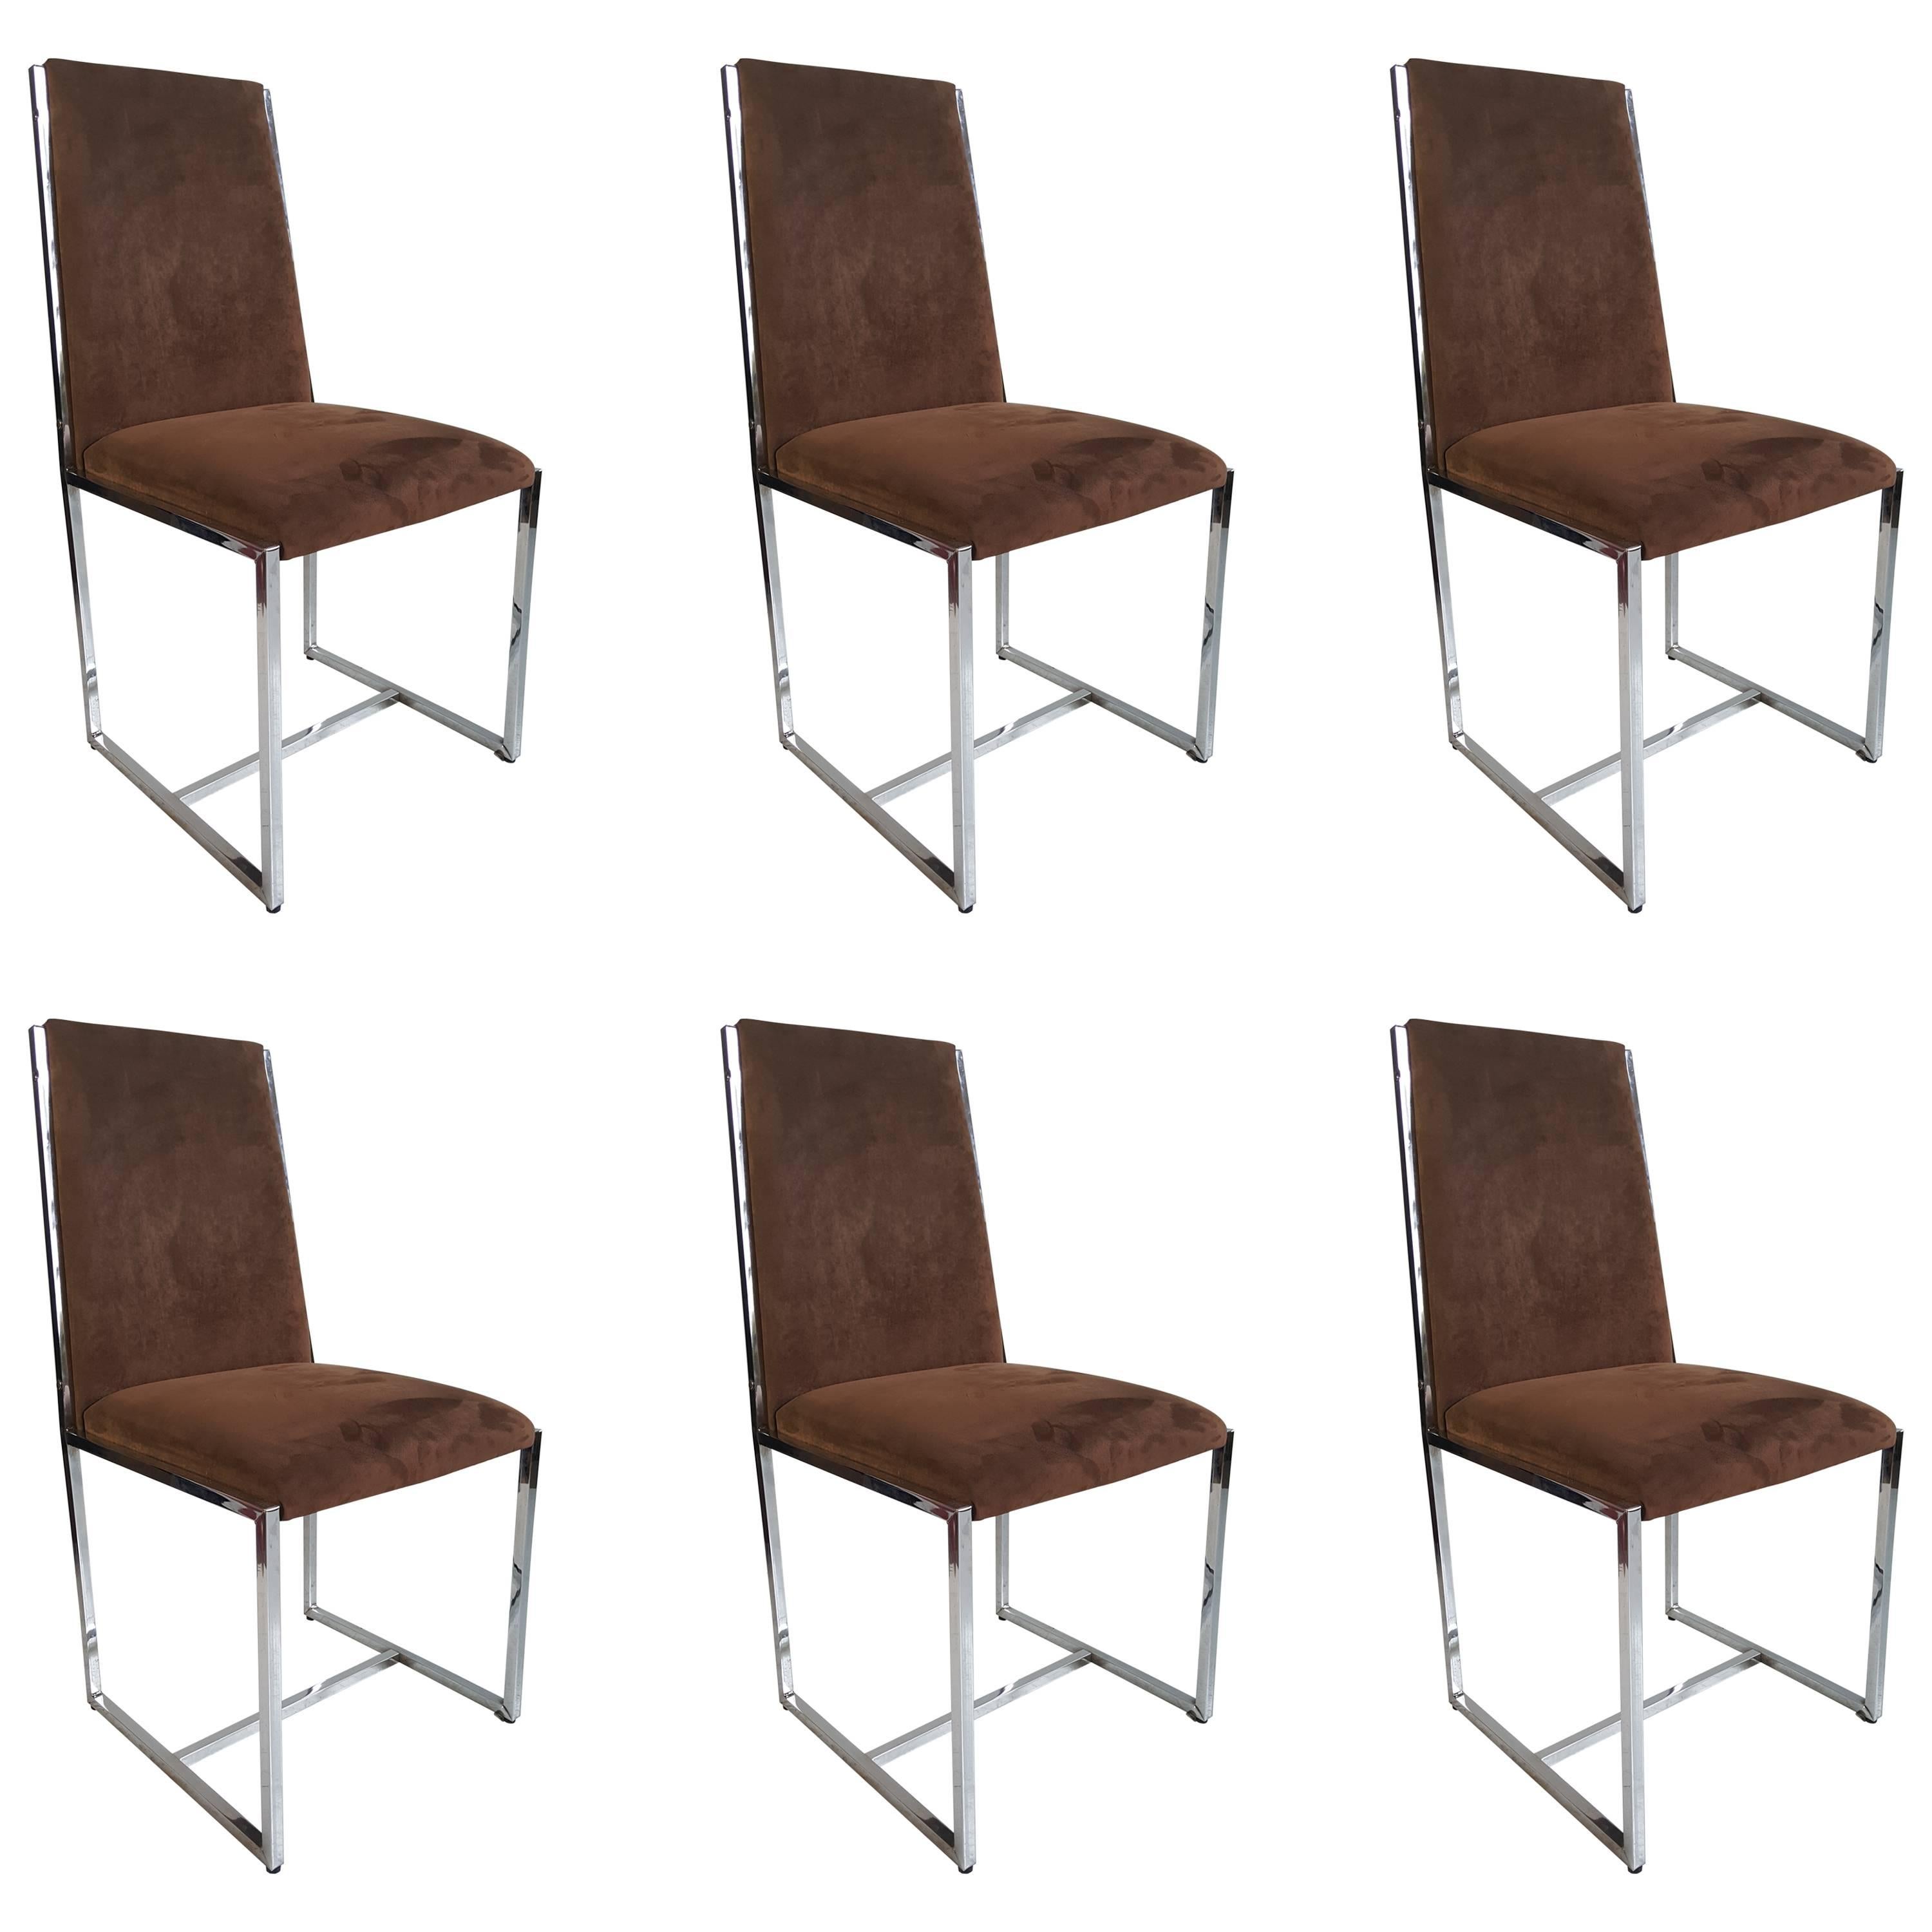 Set of Six Chrome and Fabric Dining Chairs, Manner of Milo Baughman, 1970s